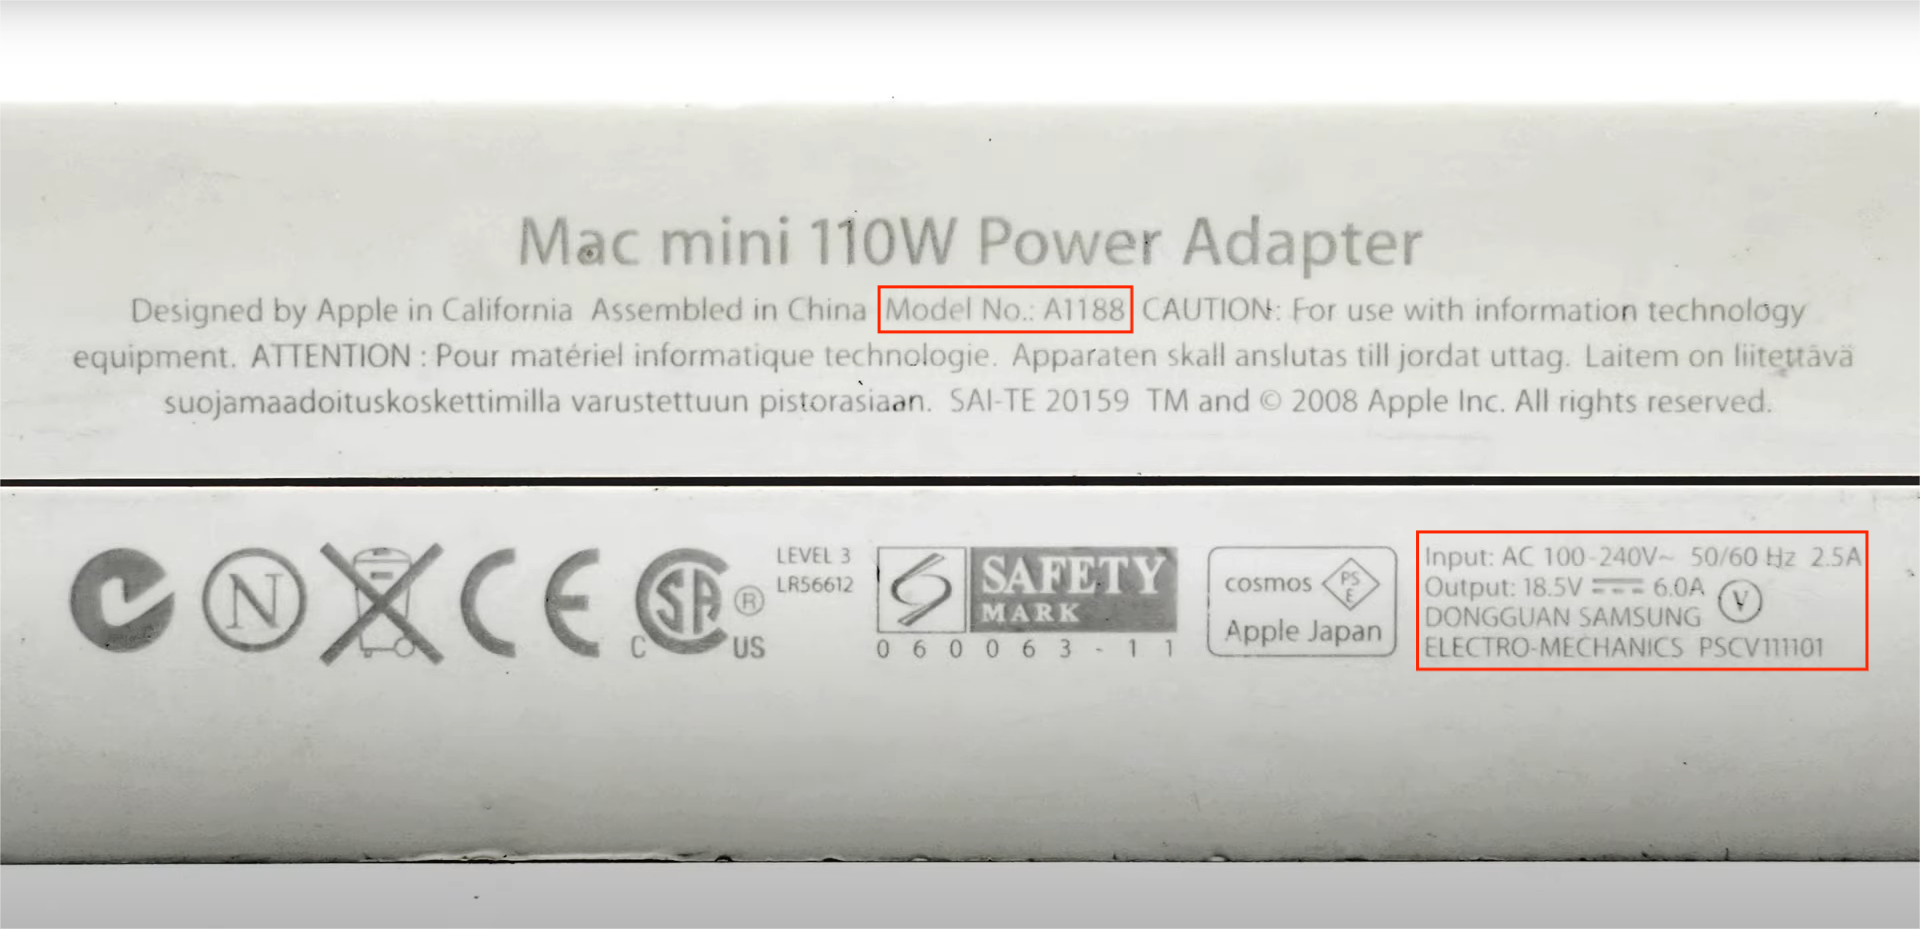 Back to 2006 | Teardown of Old Apple Mac mini 110W Power Adapter (A1188)-Chargerlab